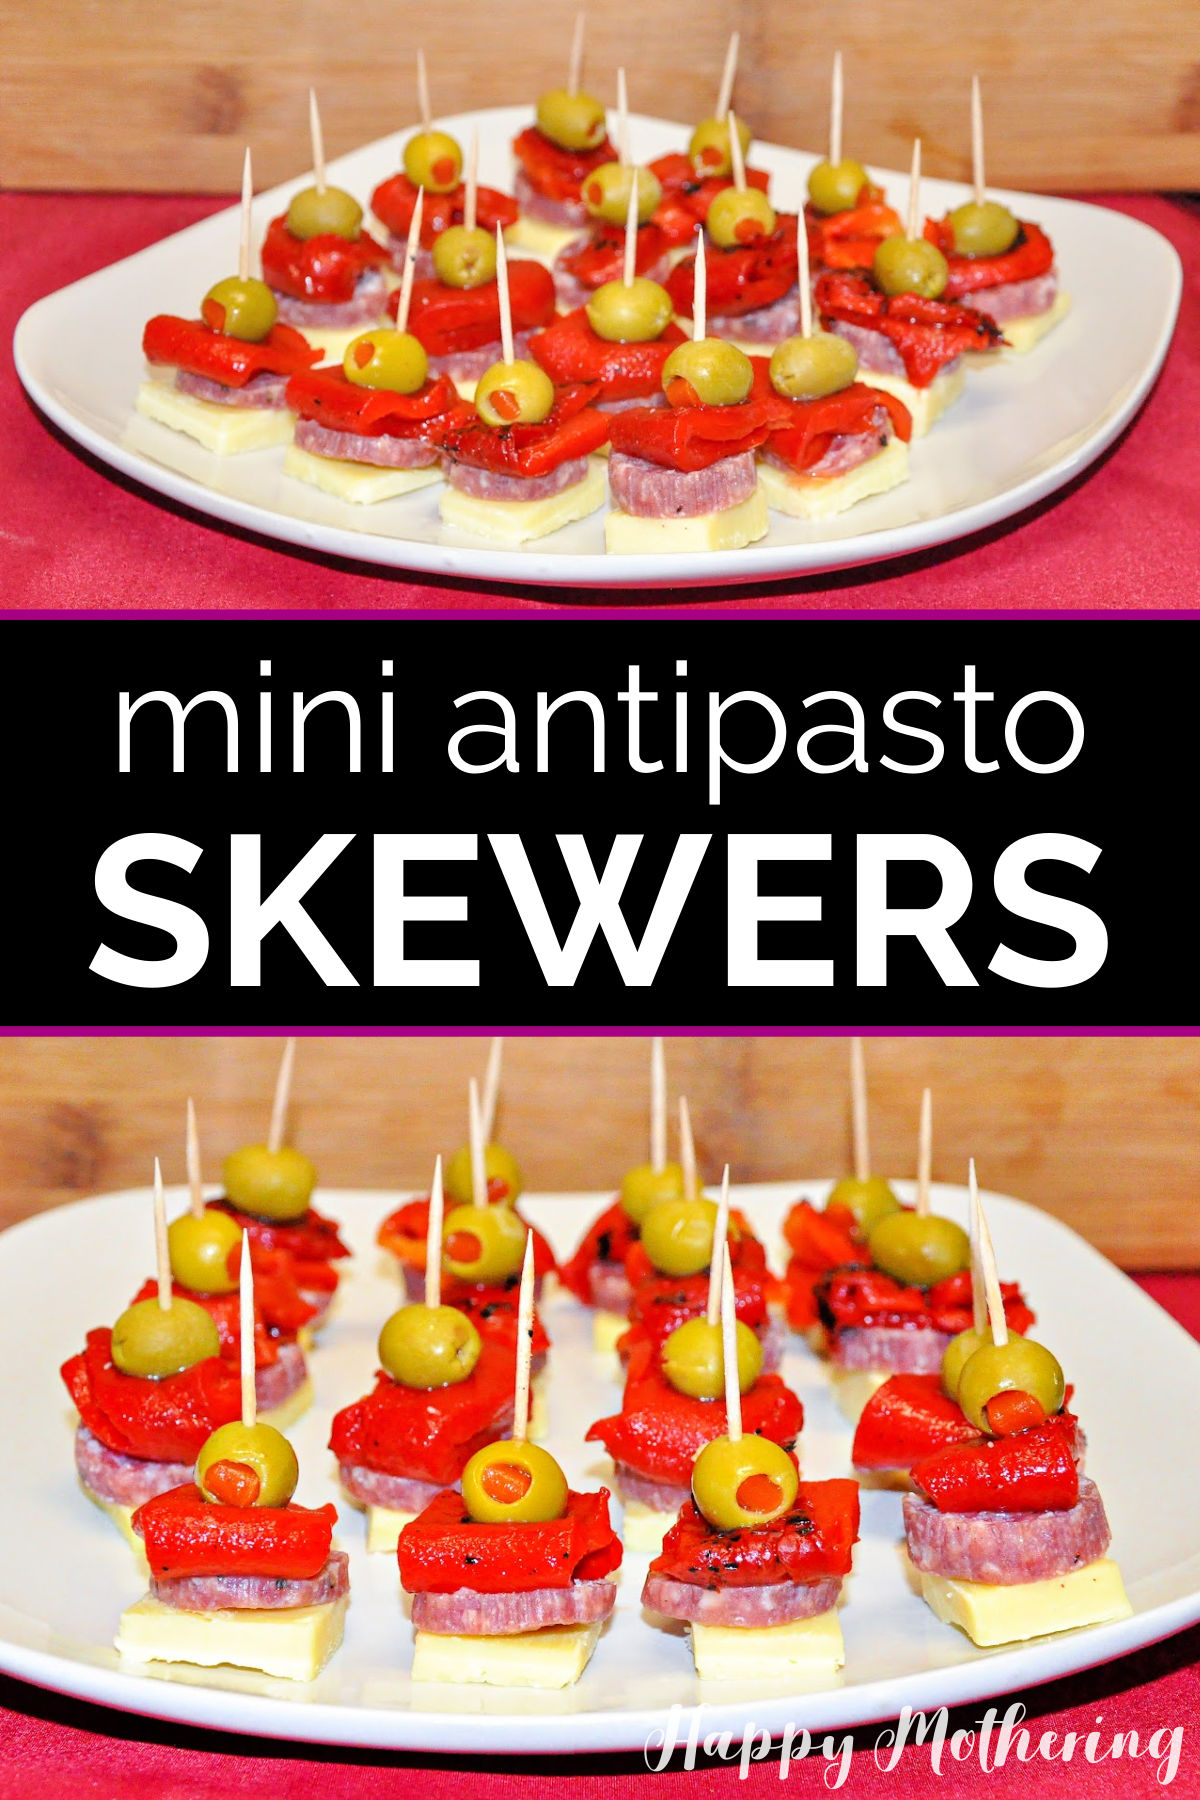 Two plates of antipasto skewer appetizers on white plates with a label that reads, "Mini Antipasto Skewers."